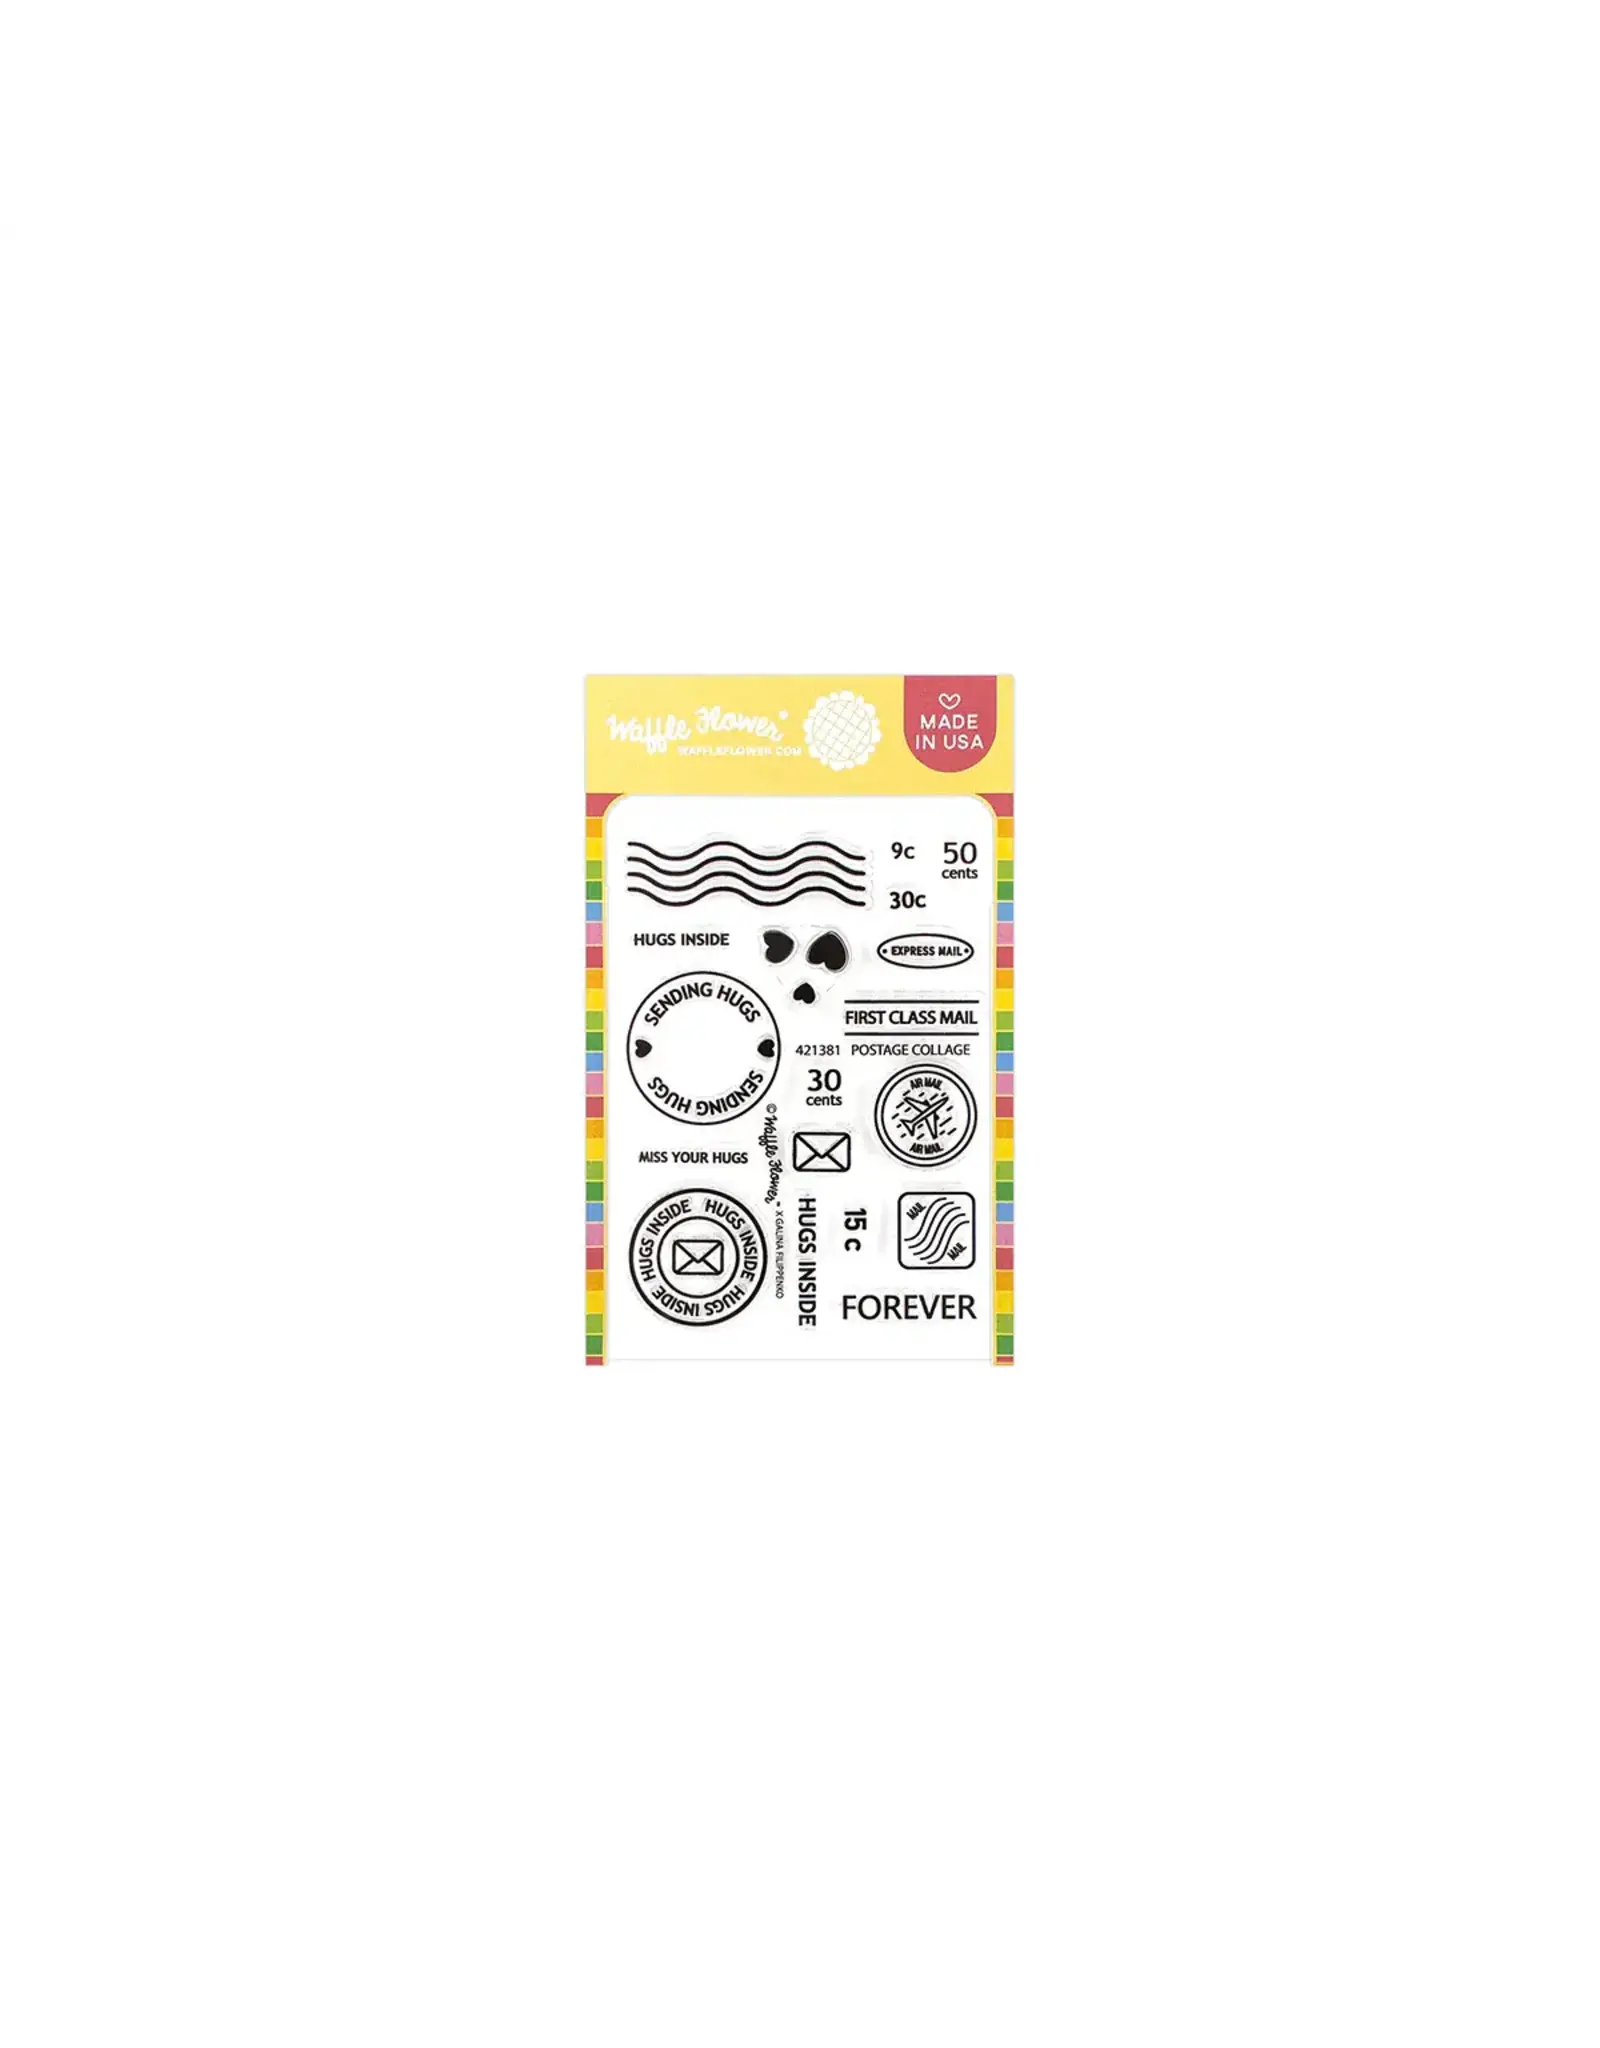 WAFFLE FLOWER WAFFLE FLOWER POSTAGE COLLAGE CLEAR STAMP SET